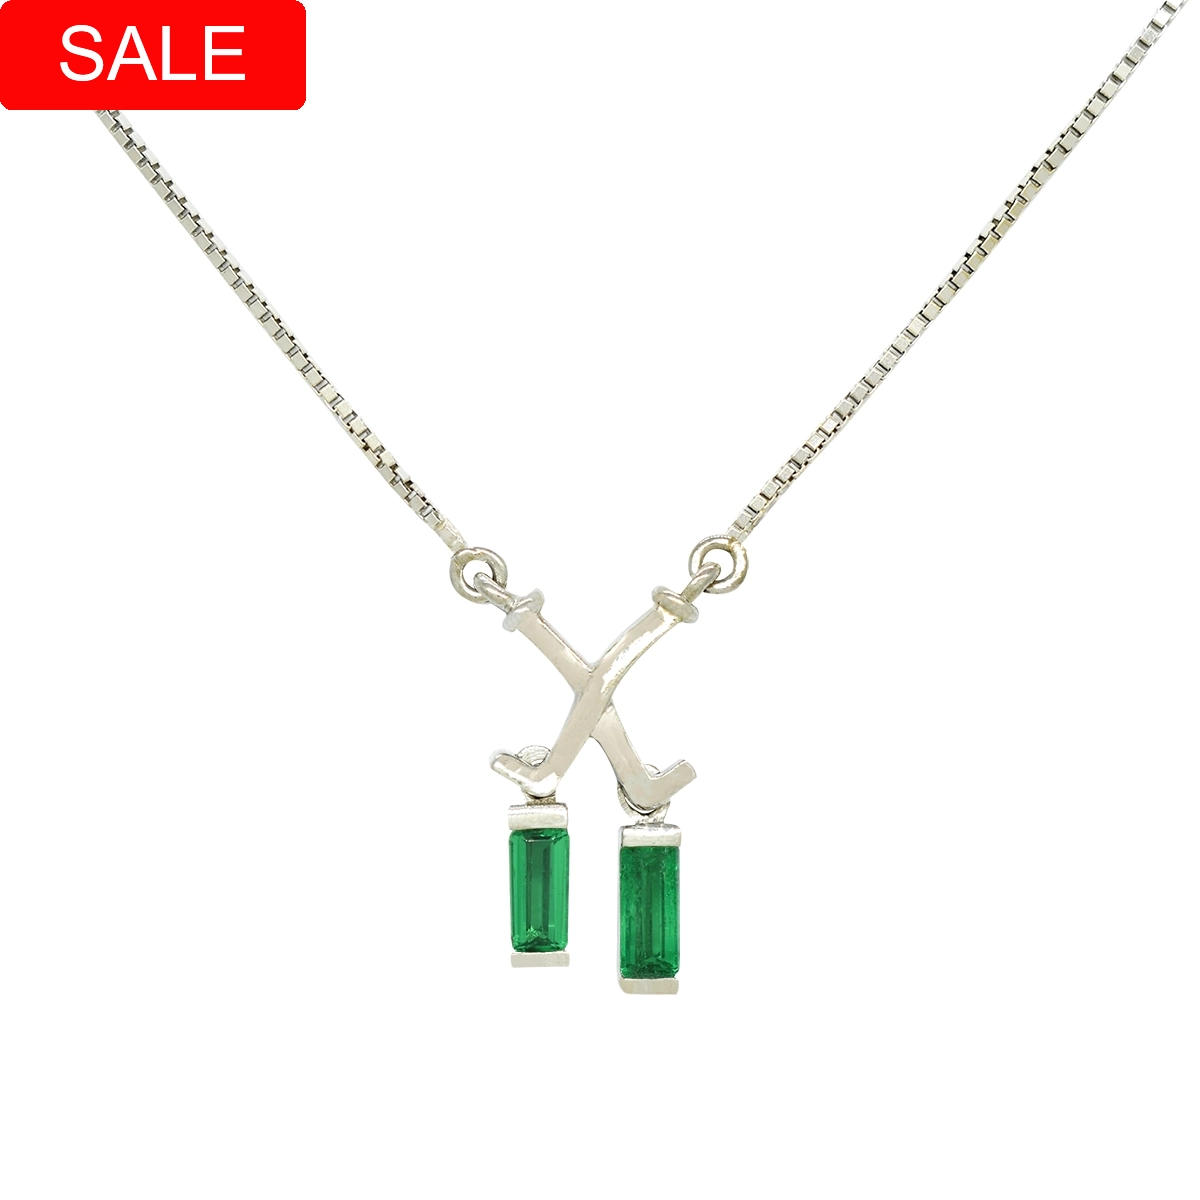 Emerald necklace in 18K white gold with 2 baguette cut natural Colombian emeralds in 1.04 Ct. t.w. set in half bezel setting